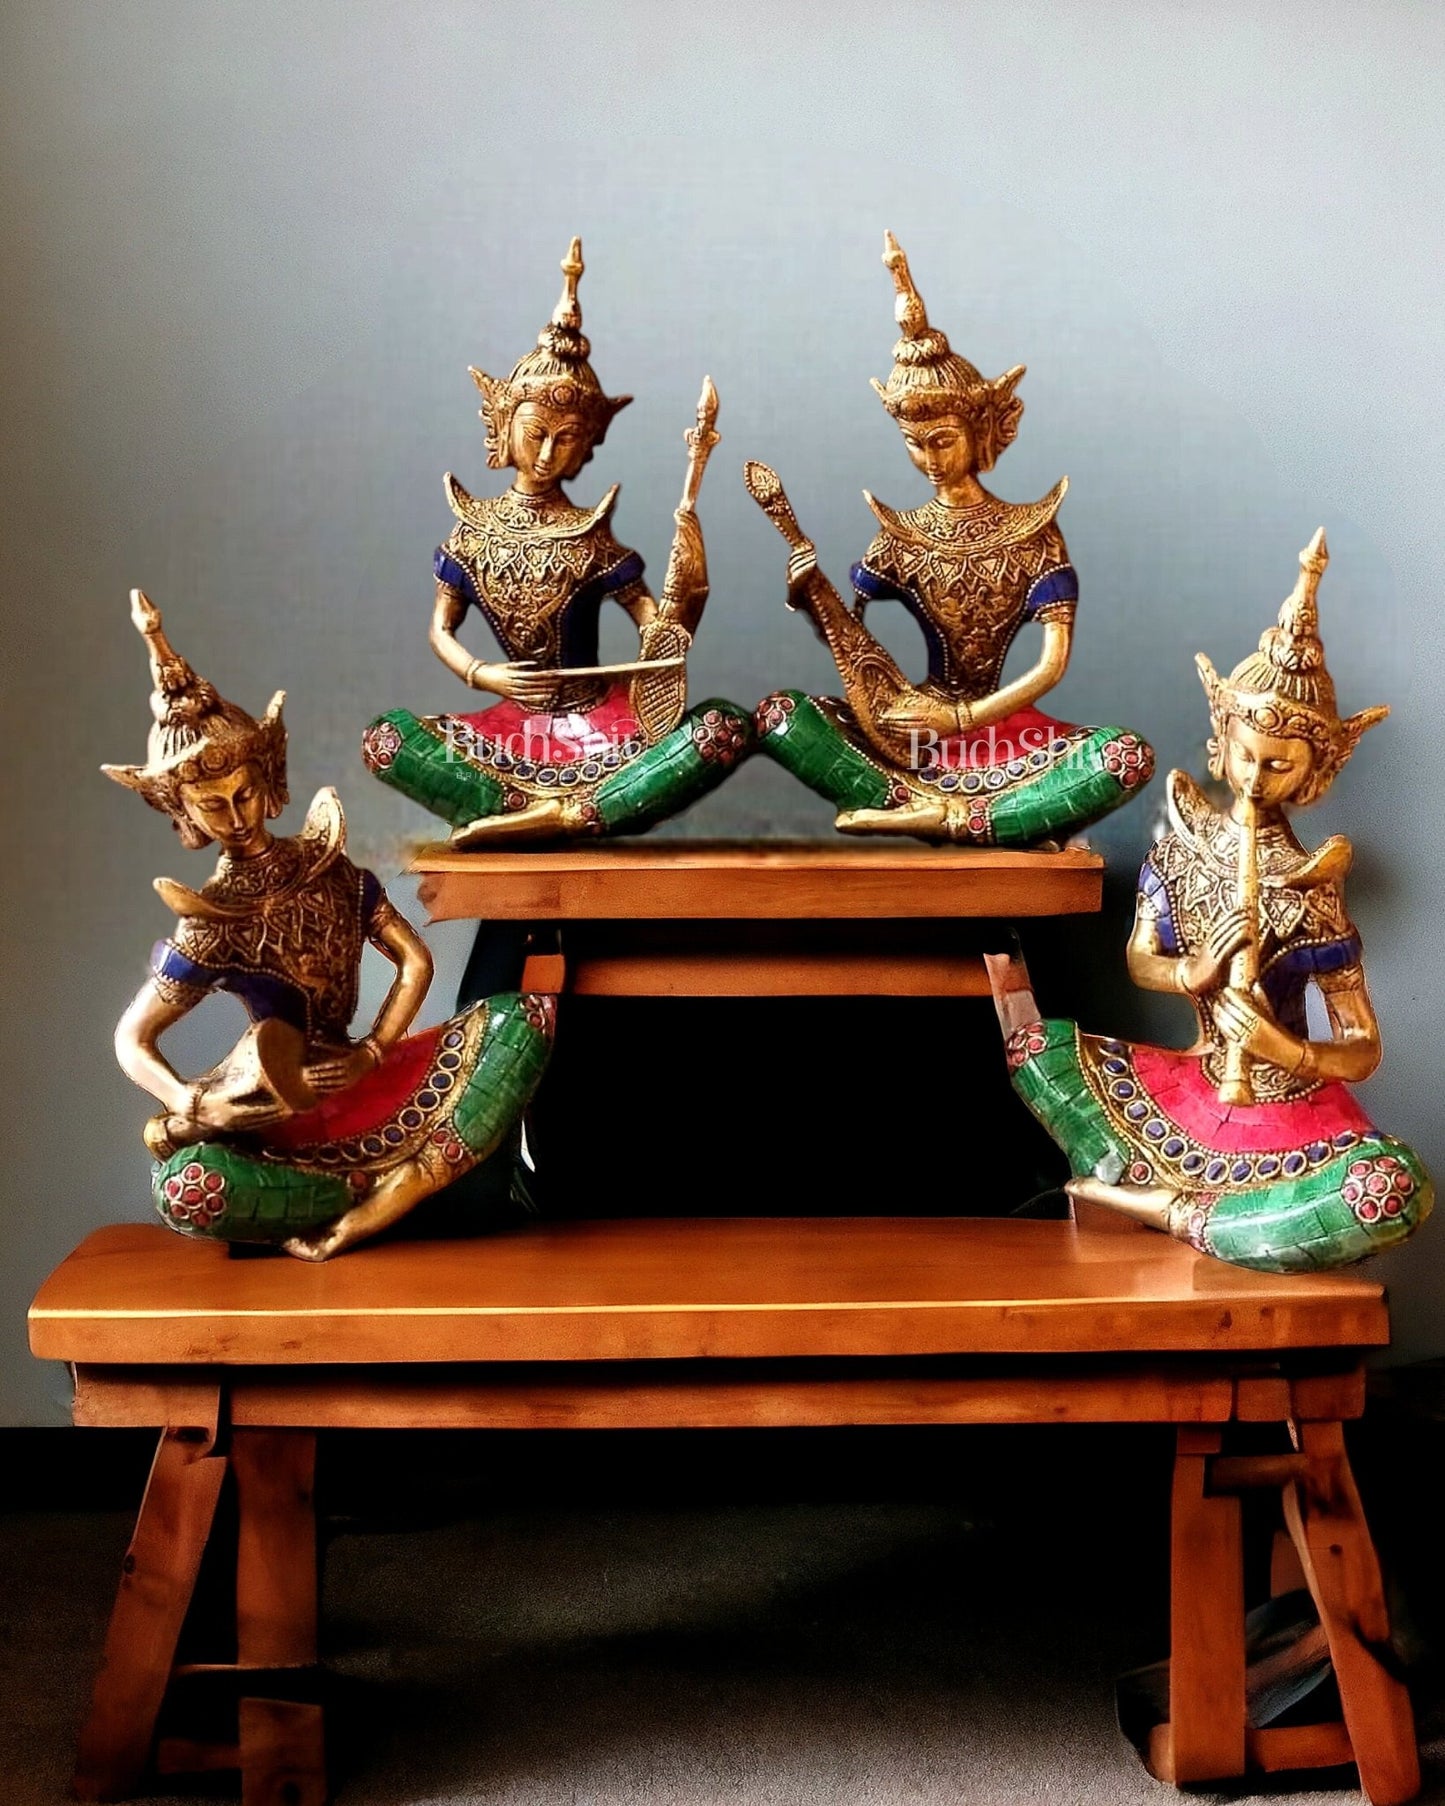 Handcrafted Thai Musical Set of 4 with Natural Stones - 8" - Budhshiv.com